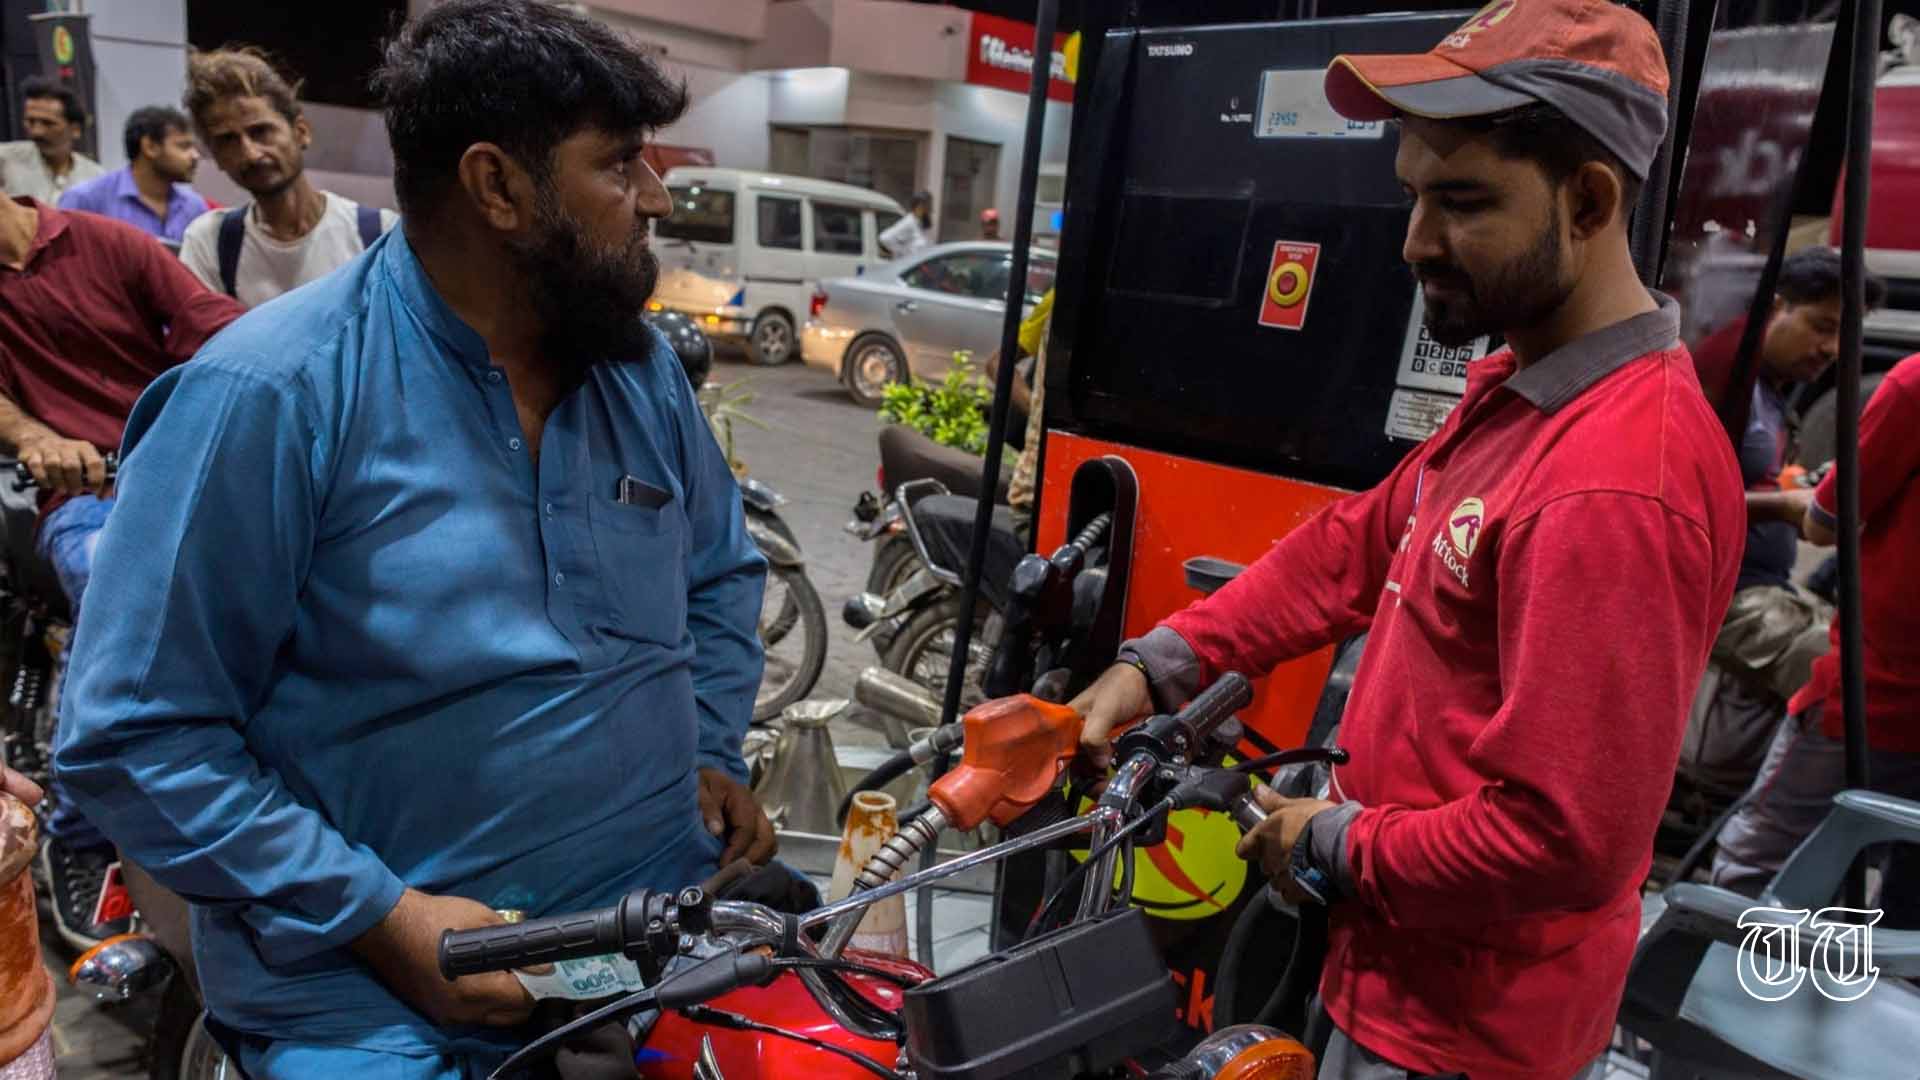 A file photo is shown of a motorcyclist fueling up at a Karachi petrol station in 2022.